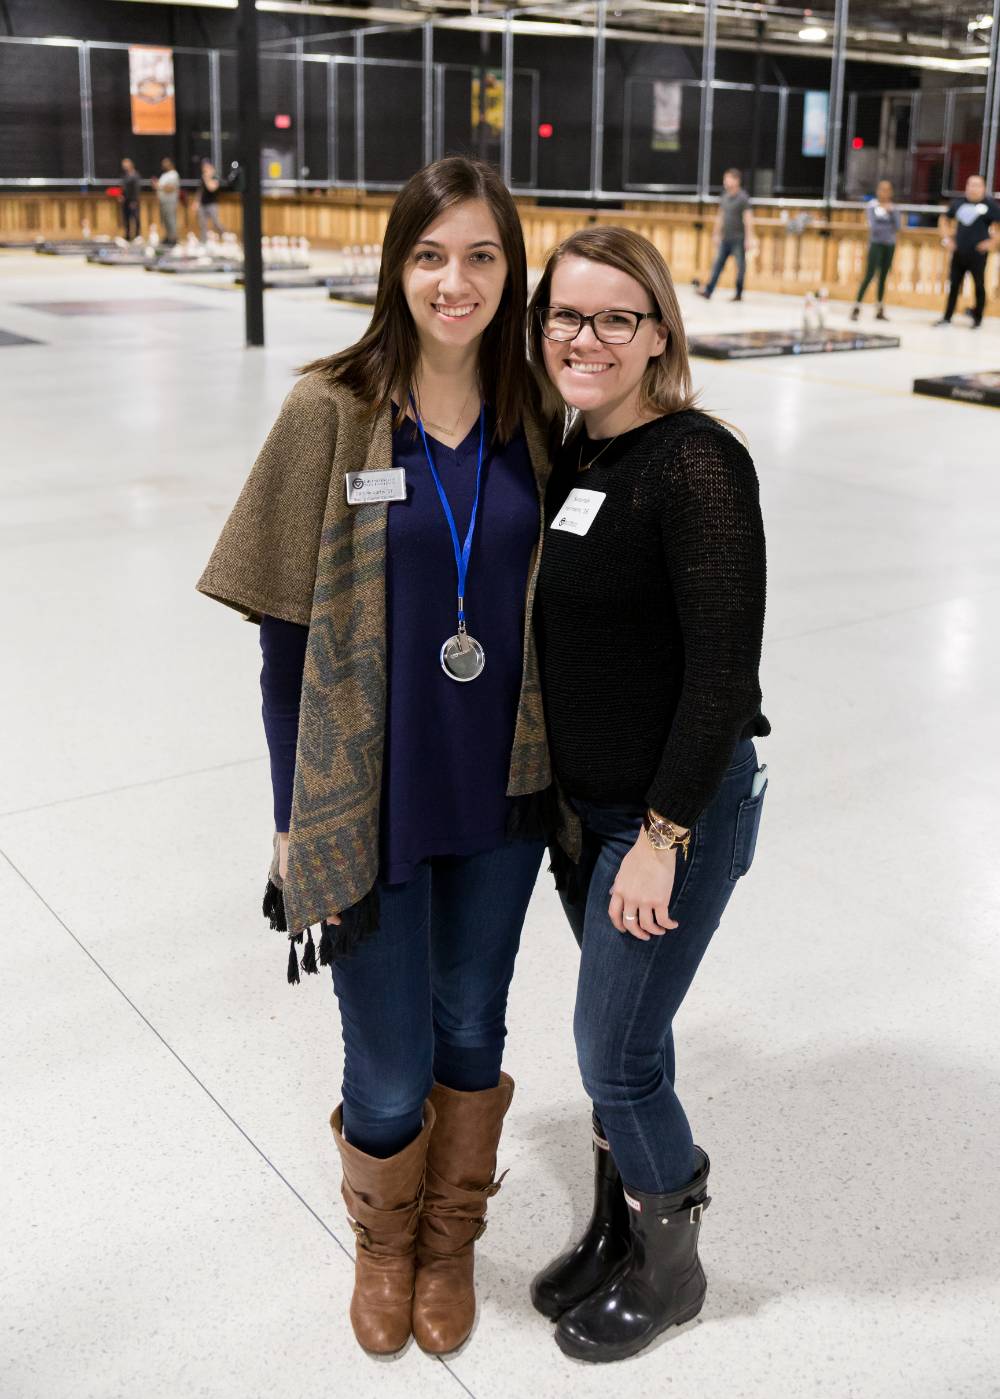 Two alumnae pose for a photo together at the Fowling Fun Event